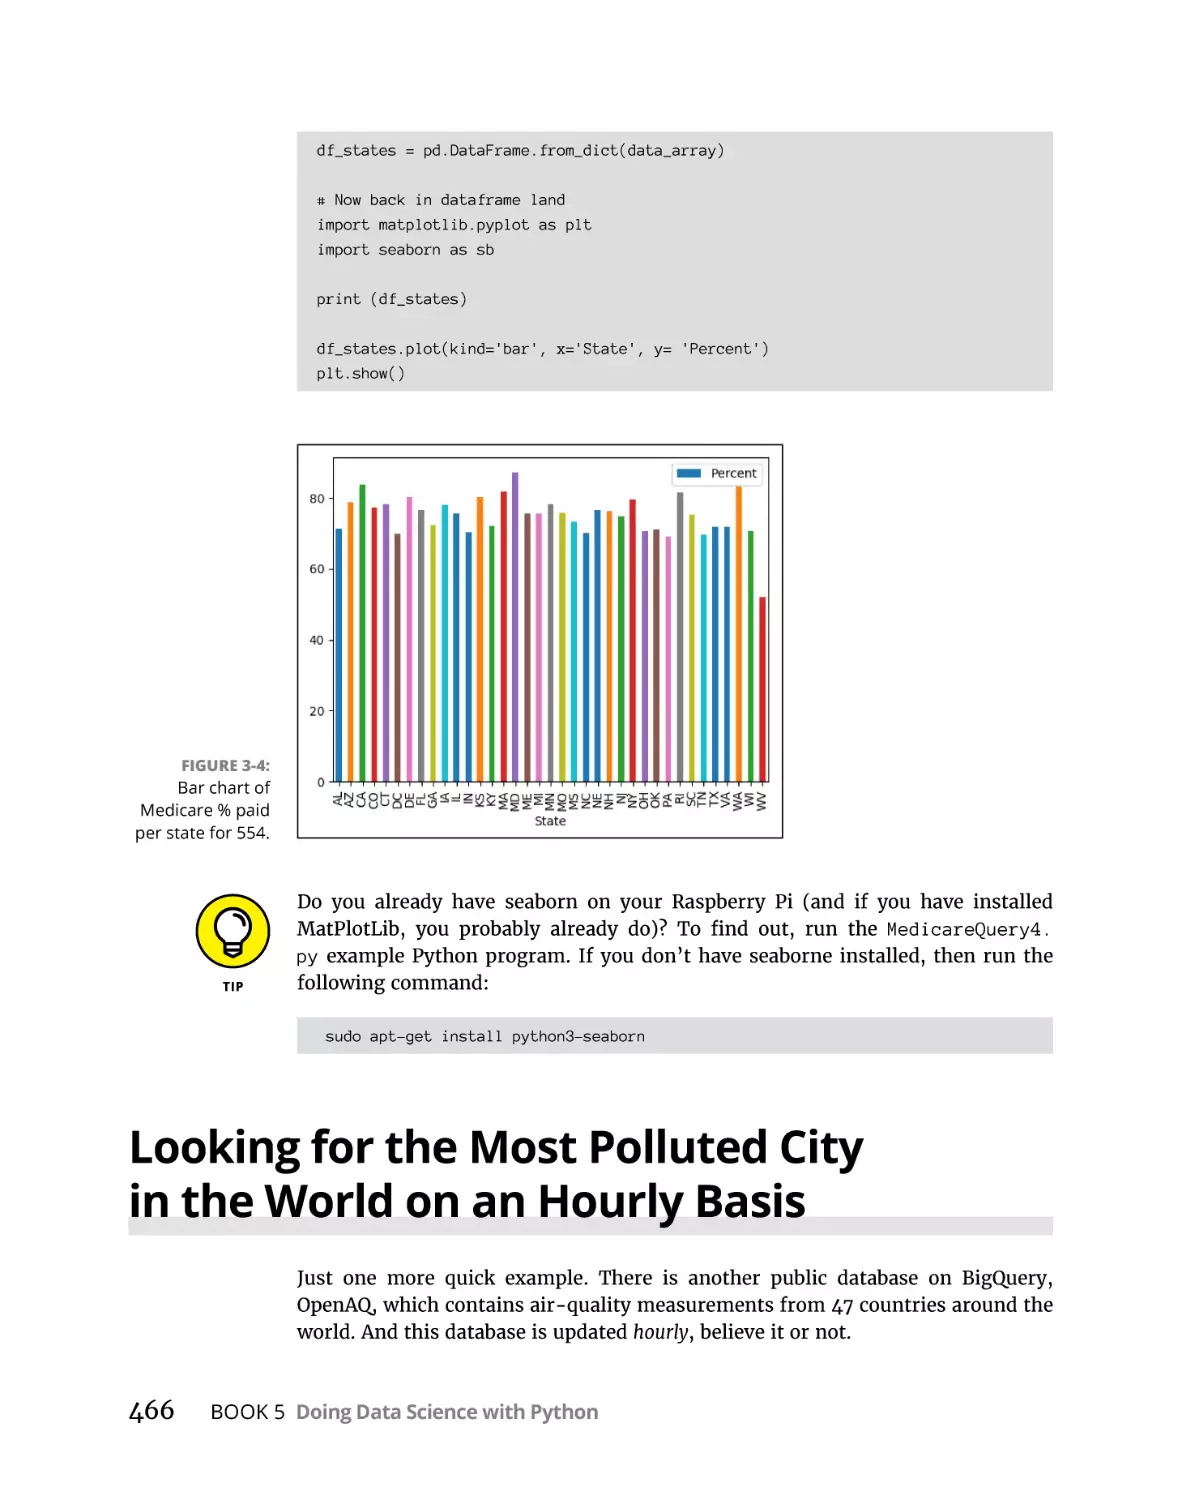 Looking for the Most Polluted City in the World on an Hourly Basis